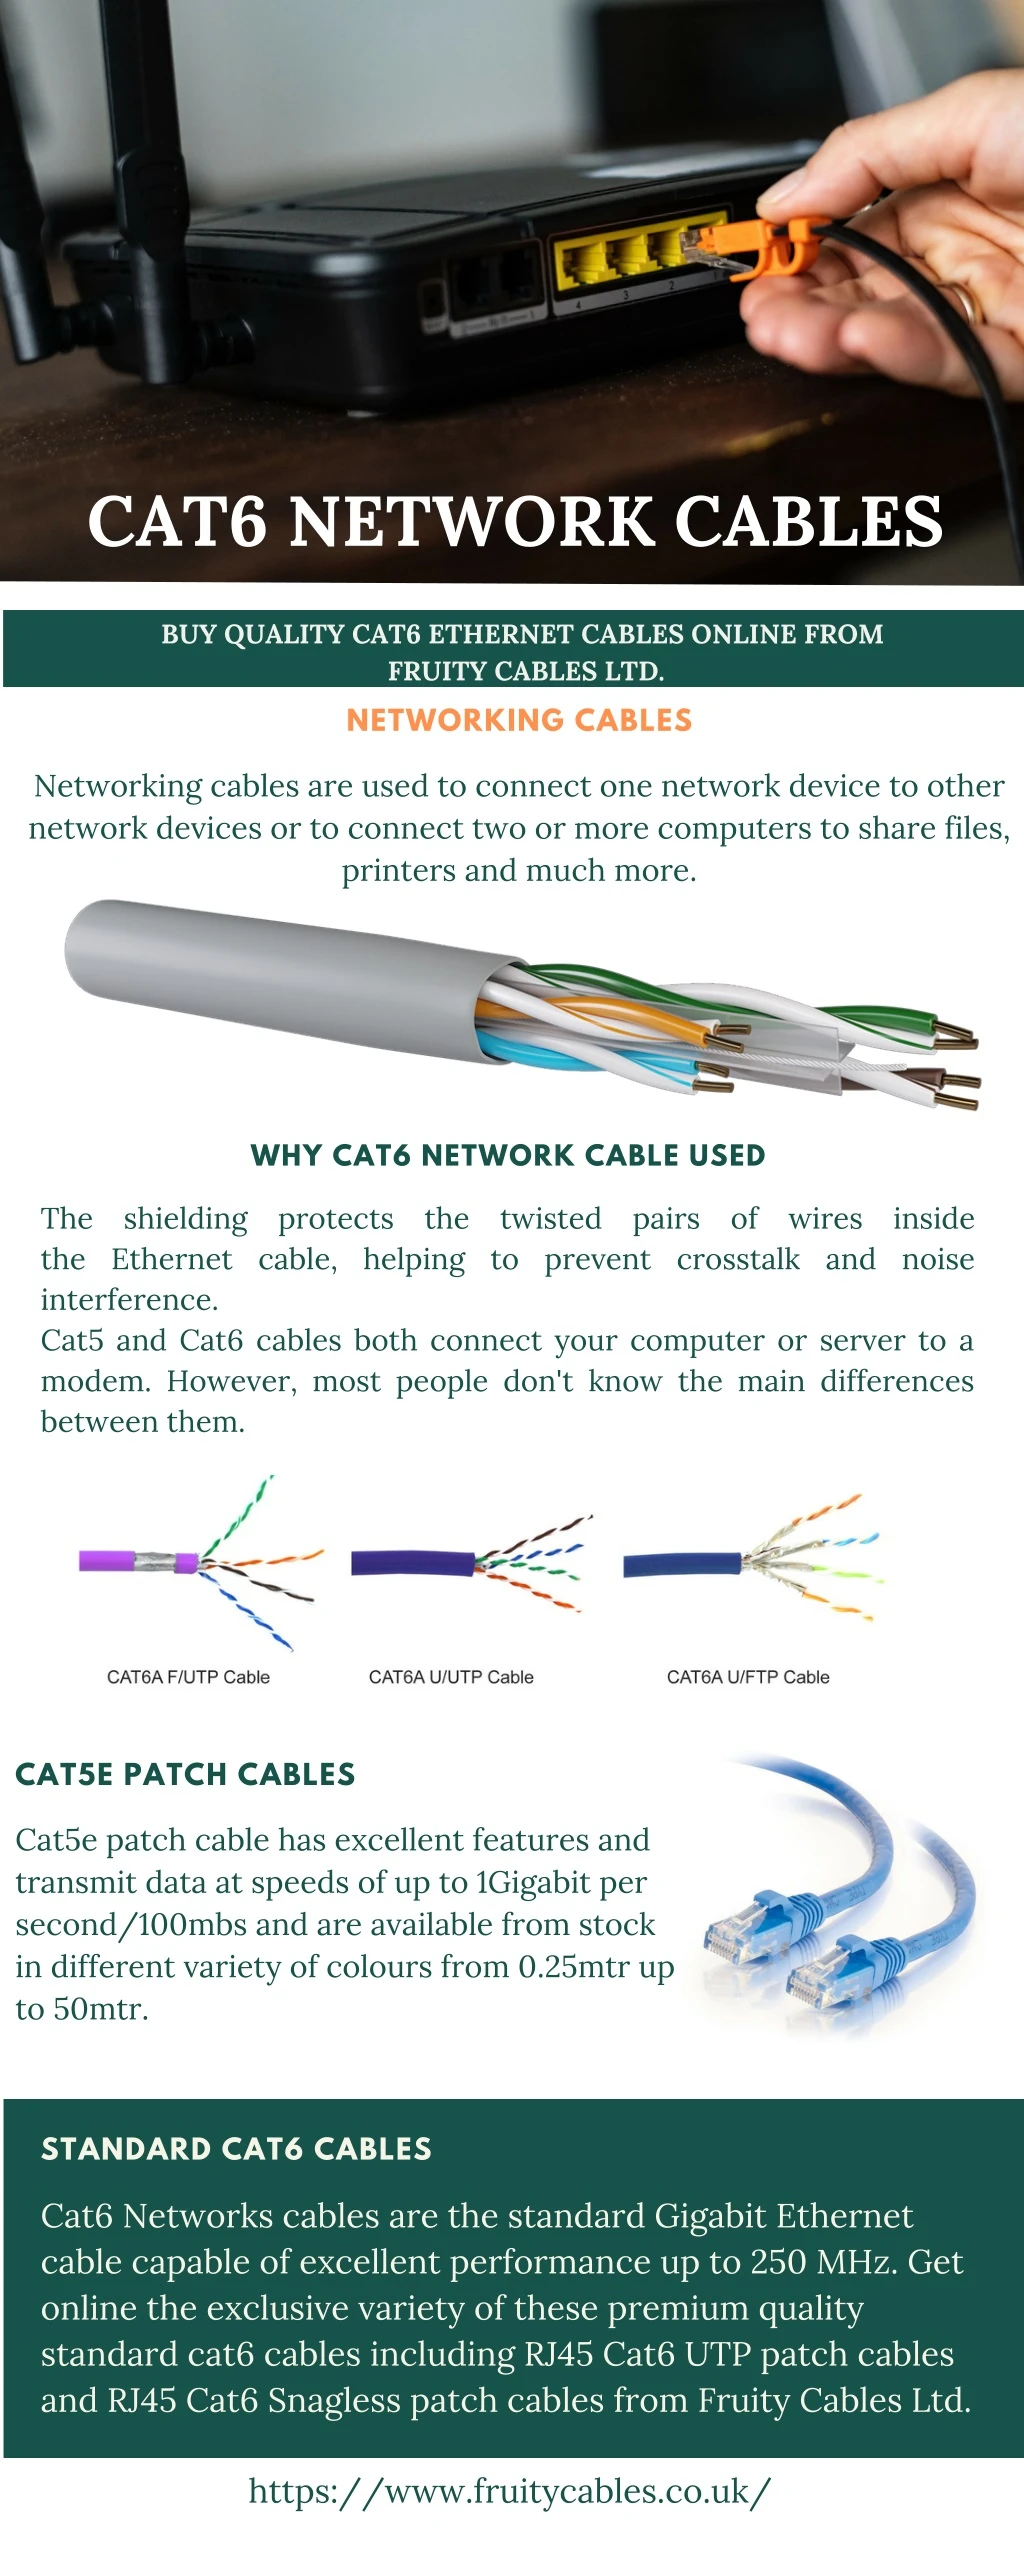 cat6 network cables buy quality cat6 ethernet